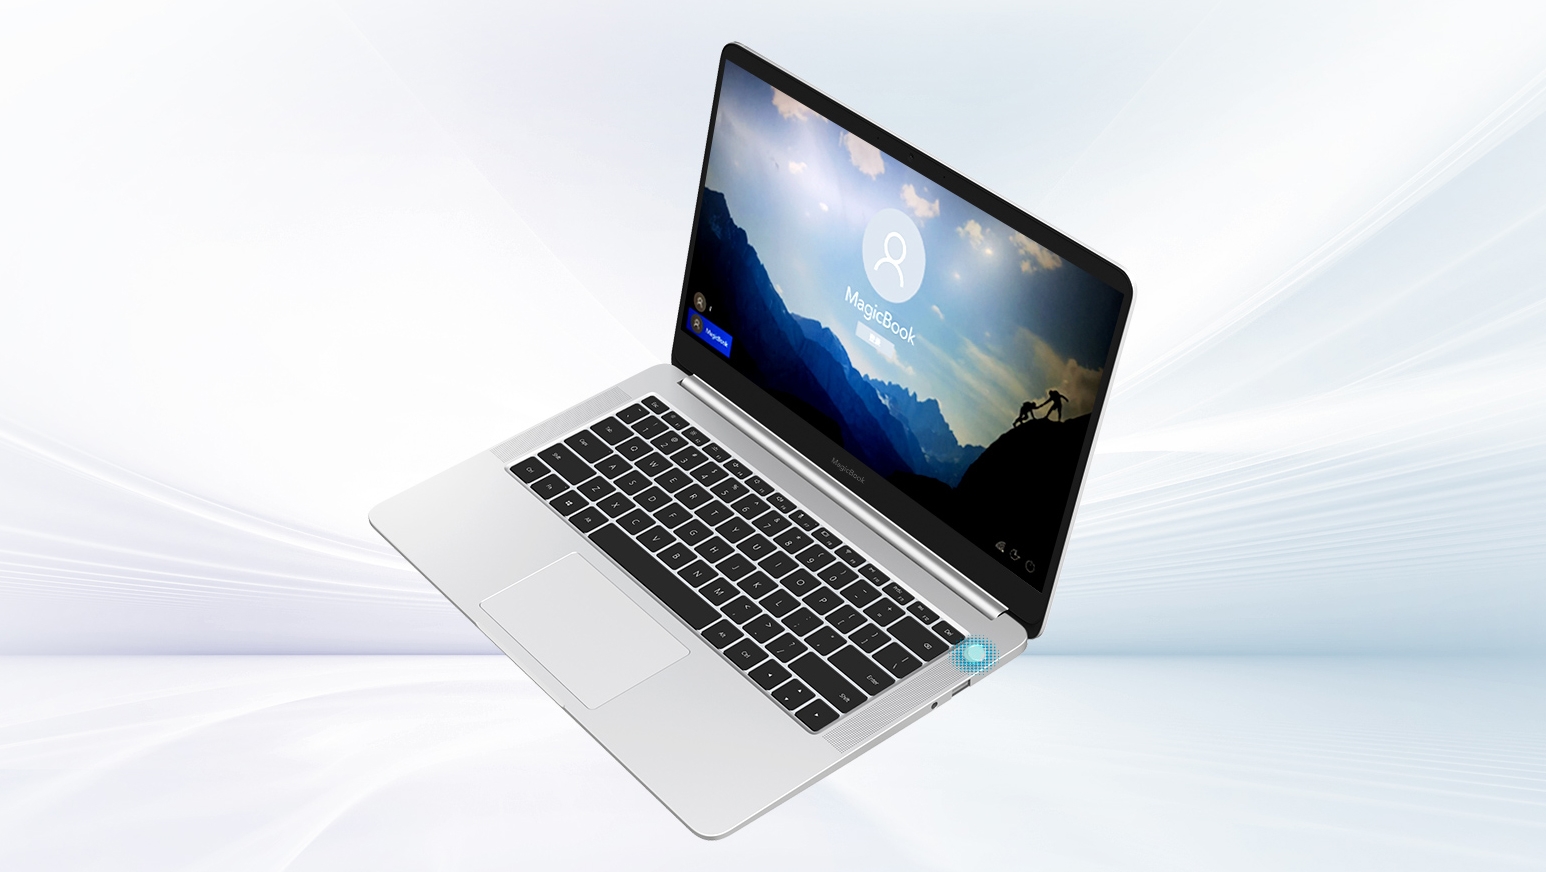 Magicbook pc manager. Ноутбук Honor MAGICBOOK 14 Ryzen 5. Ноутбук Honor MAGICBOOK 15. Ультрабук Honor MAGICBOOK 15, 15.6". Un3481 ноутбук Honor.